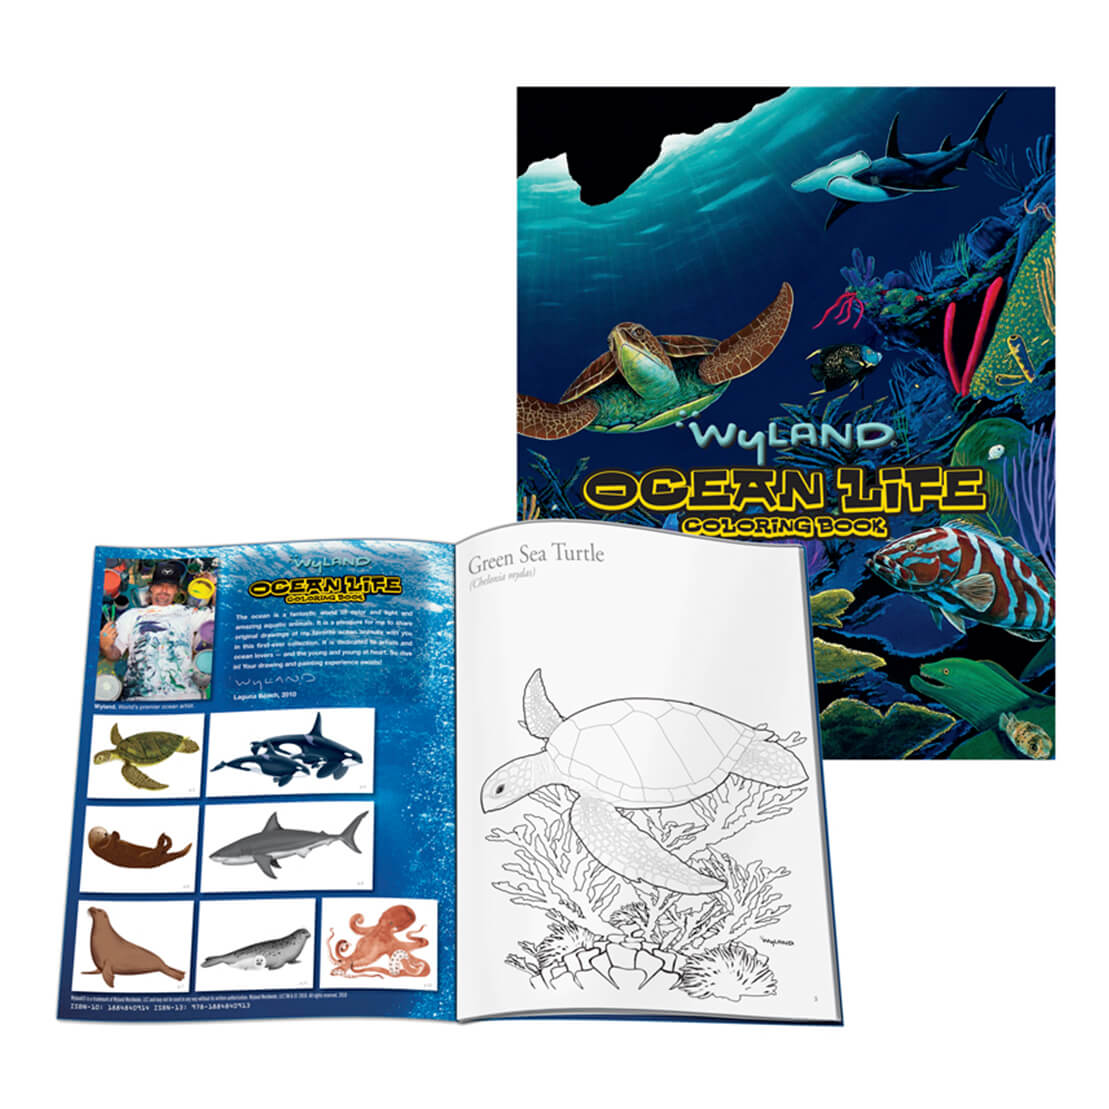 Download Wyland Ocean Life Coloring Book Play Date Bundle Of 10 Wyland Foundation